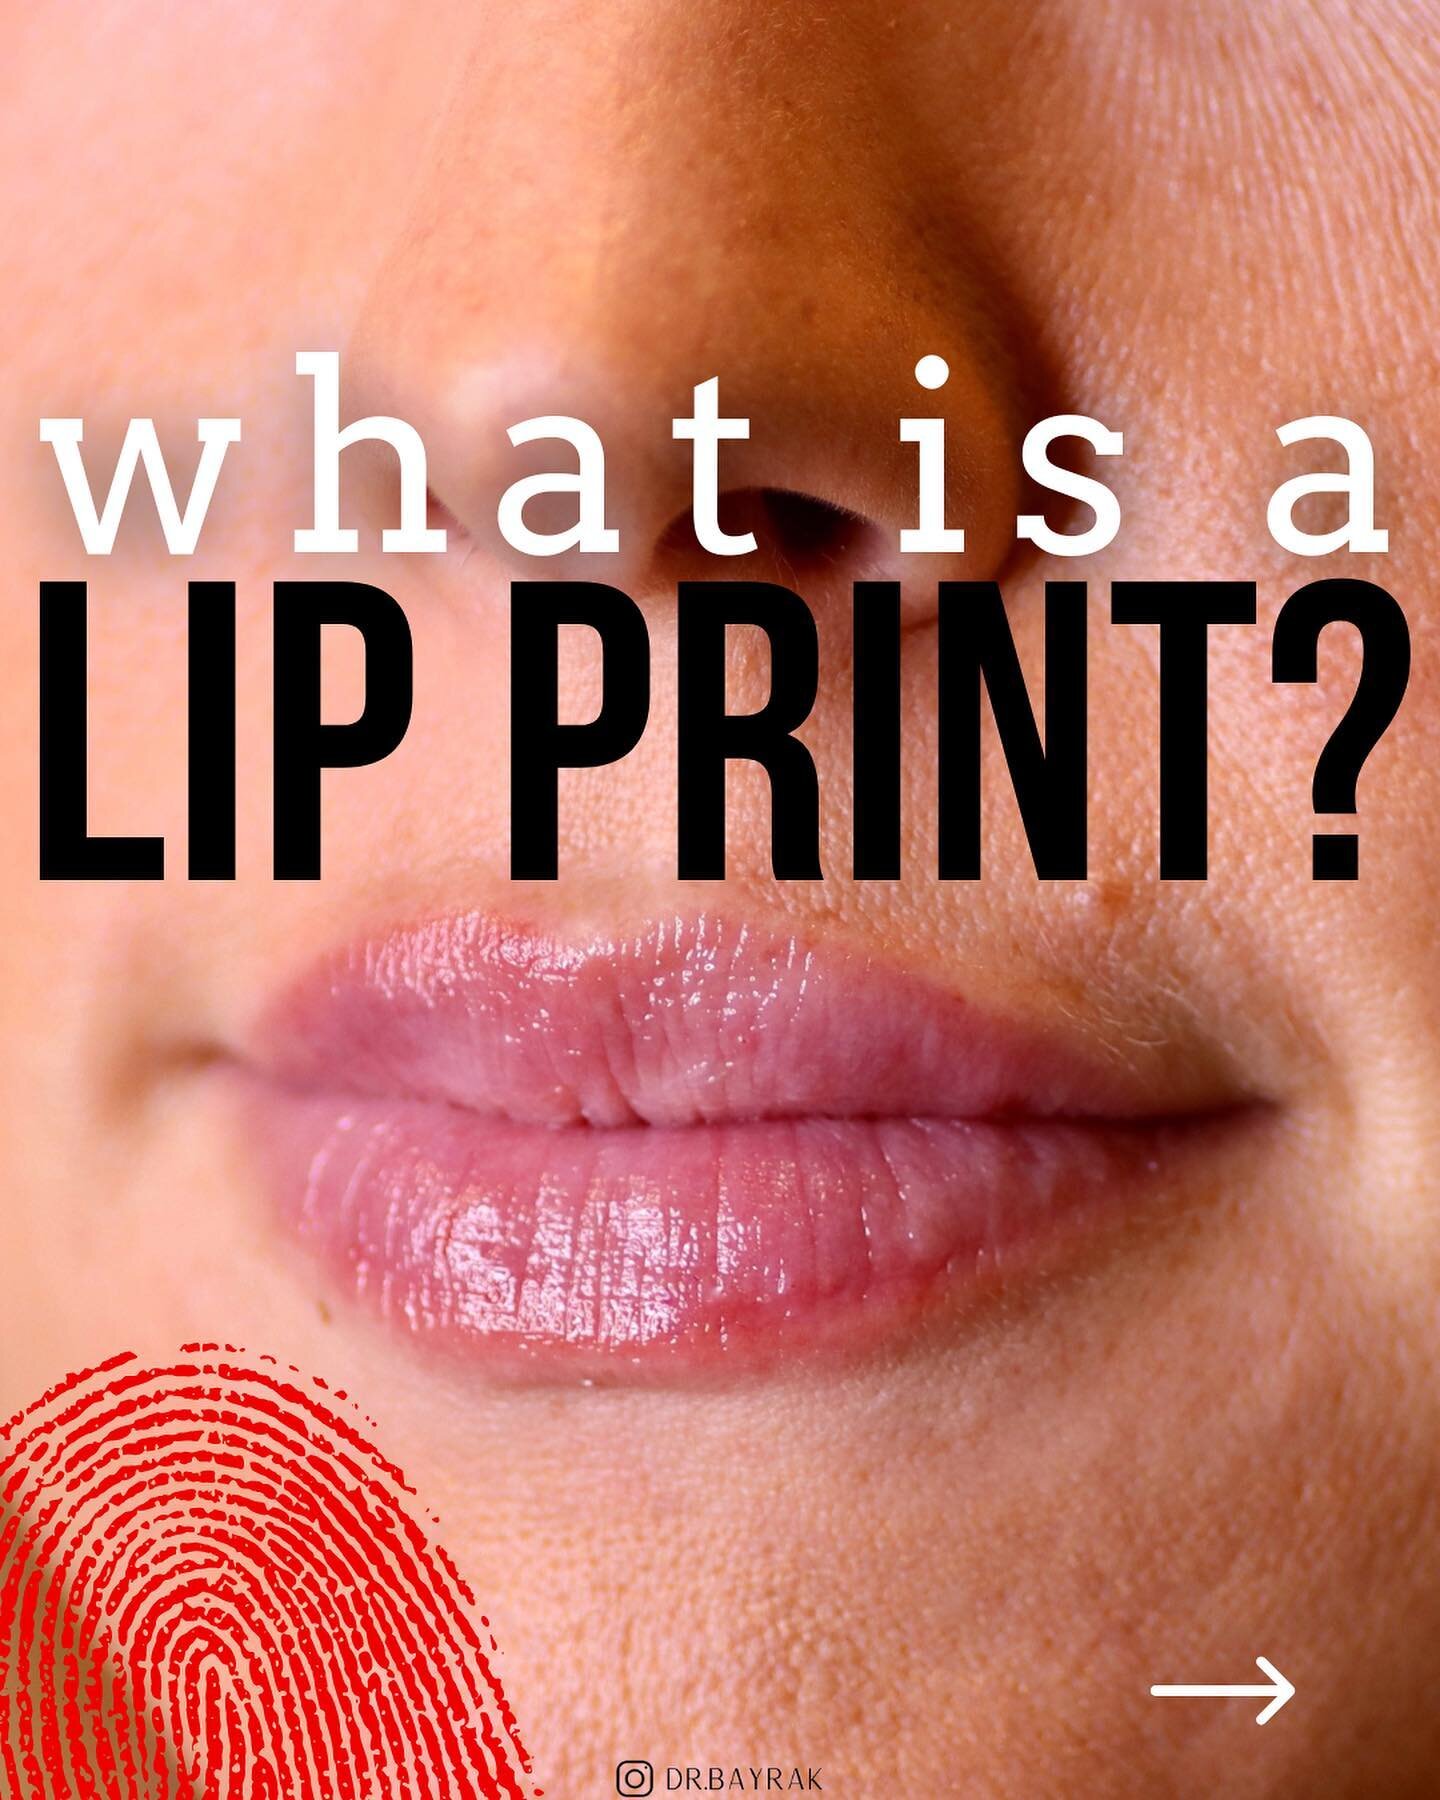 Lip prints, or &ldquo;sulci labiorum,&rdquo; refer to the patterns of grooves and fissures on the lip. These are similar to fingerprints, palm prints, and footprints, can be used as a positive means of identification (including in criminal investigat